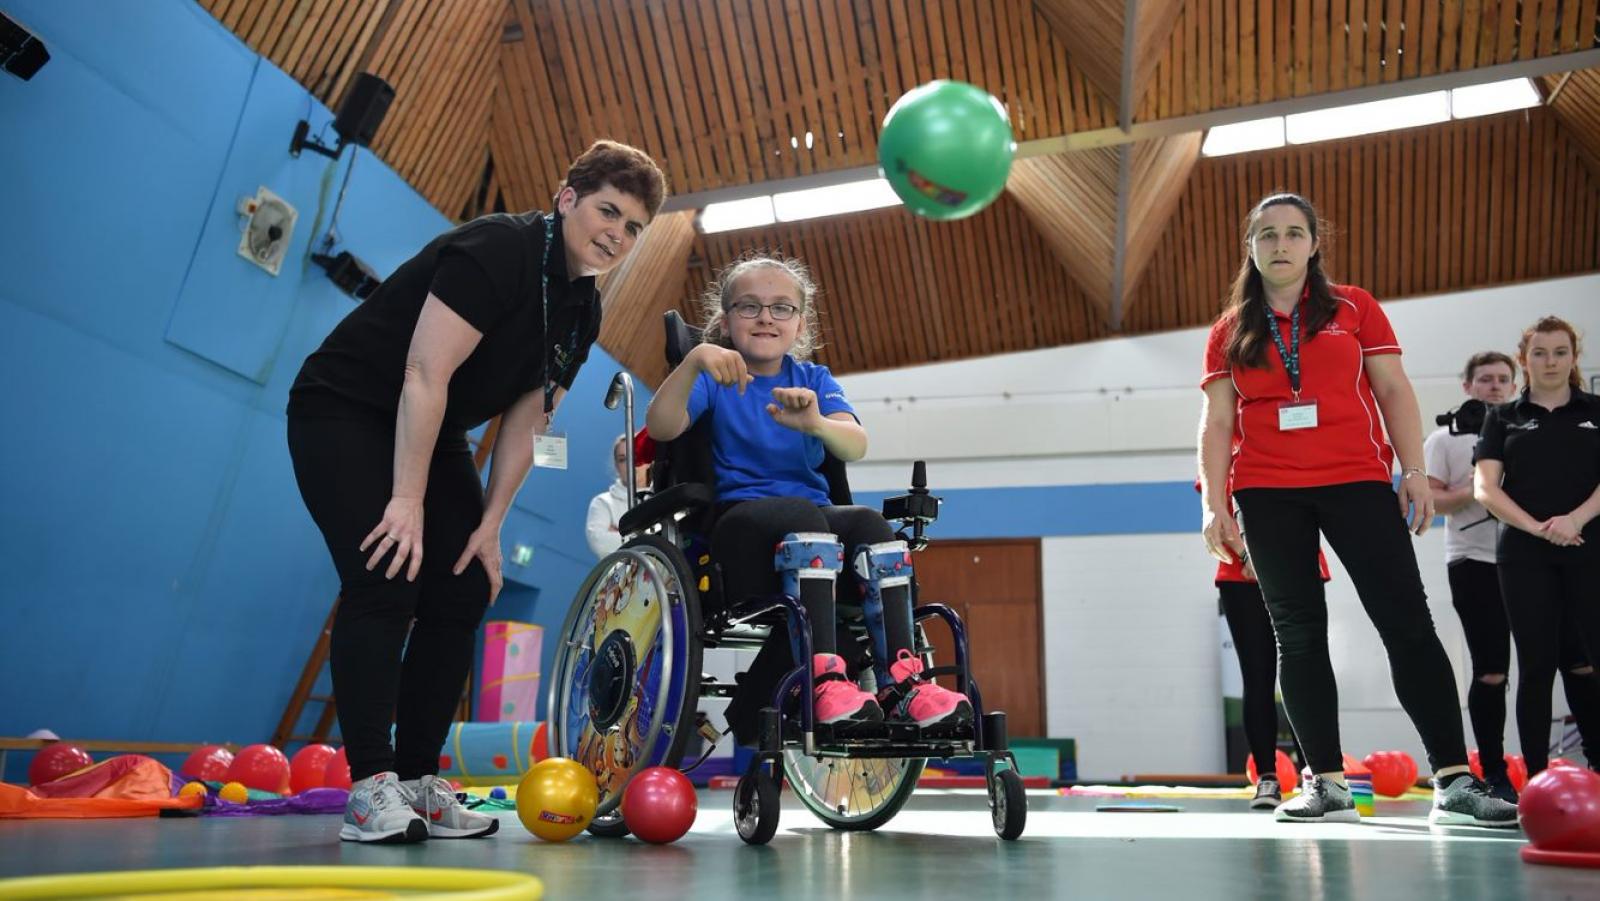 Young girl in a wheelchair throws a green ball as her coach crouches beside her